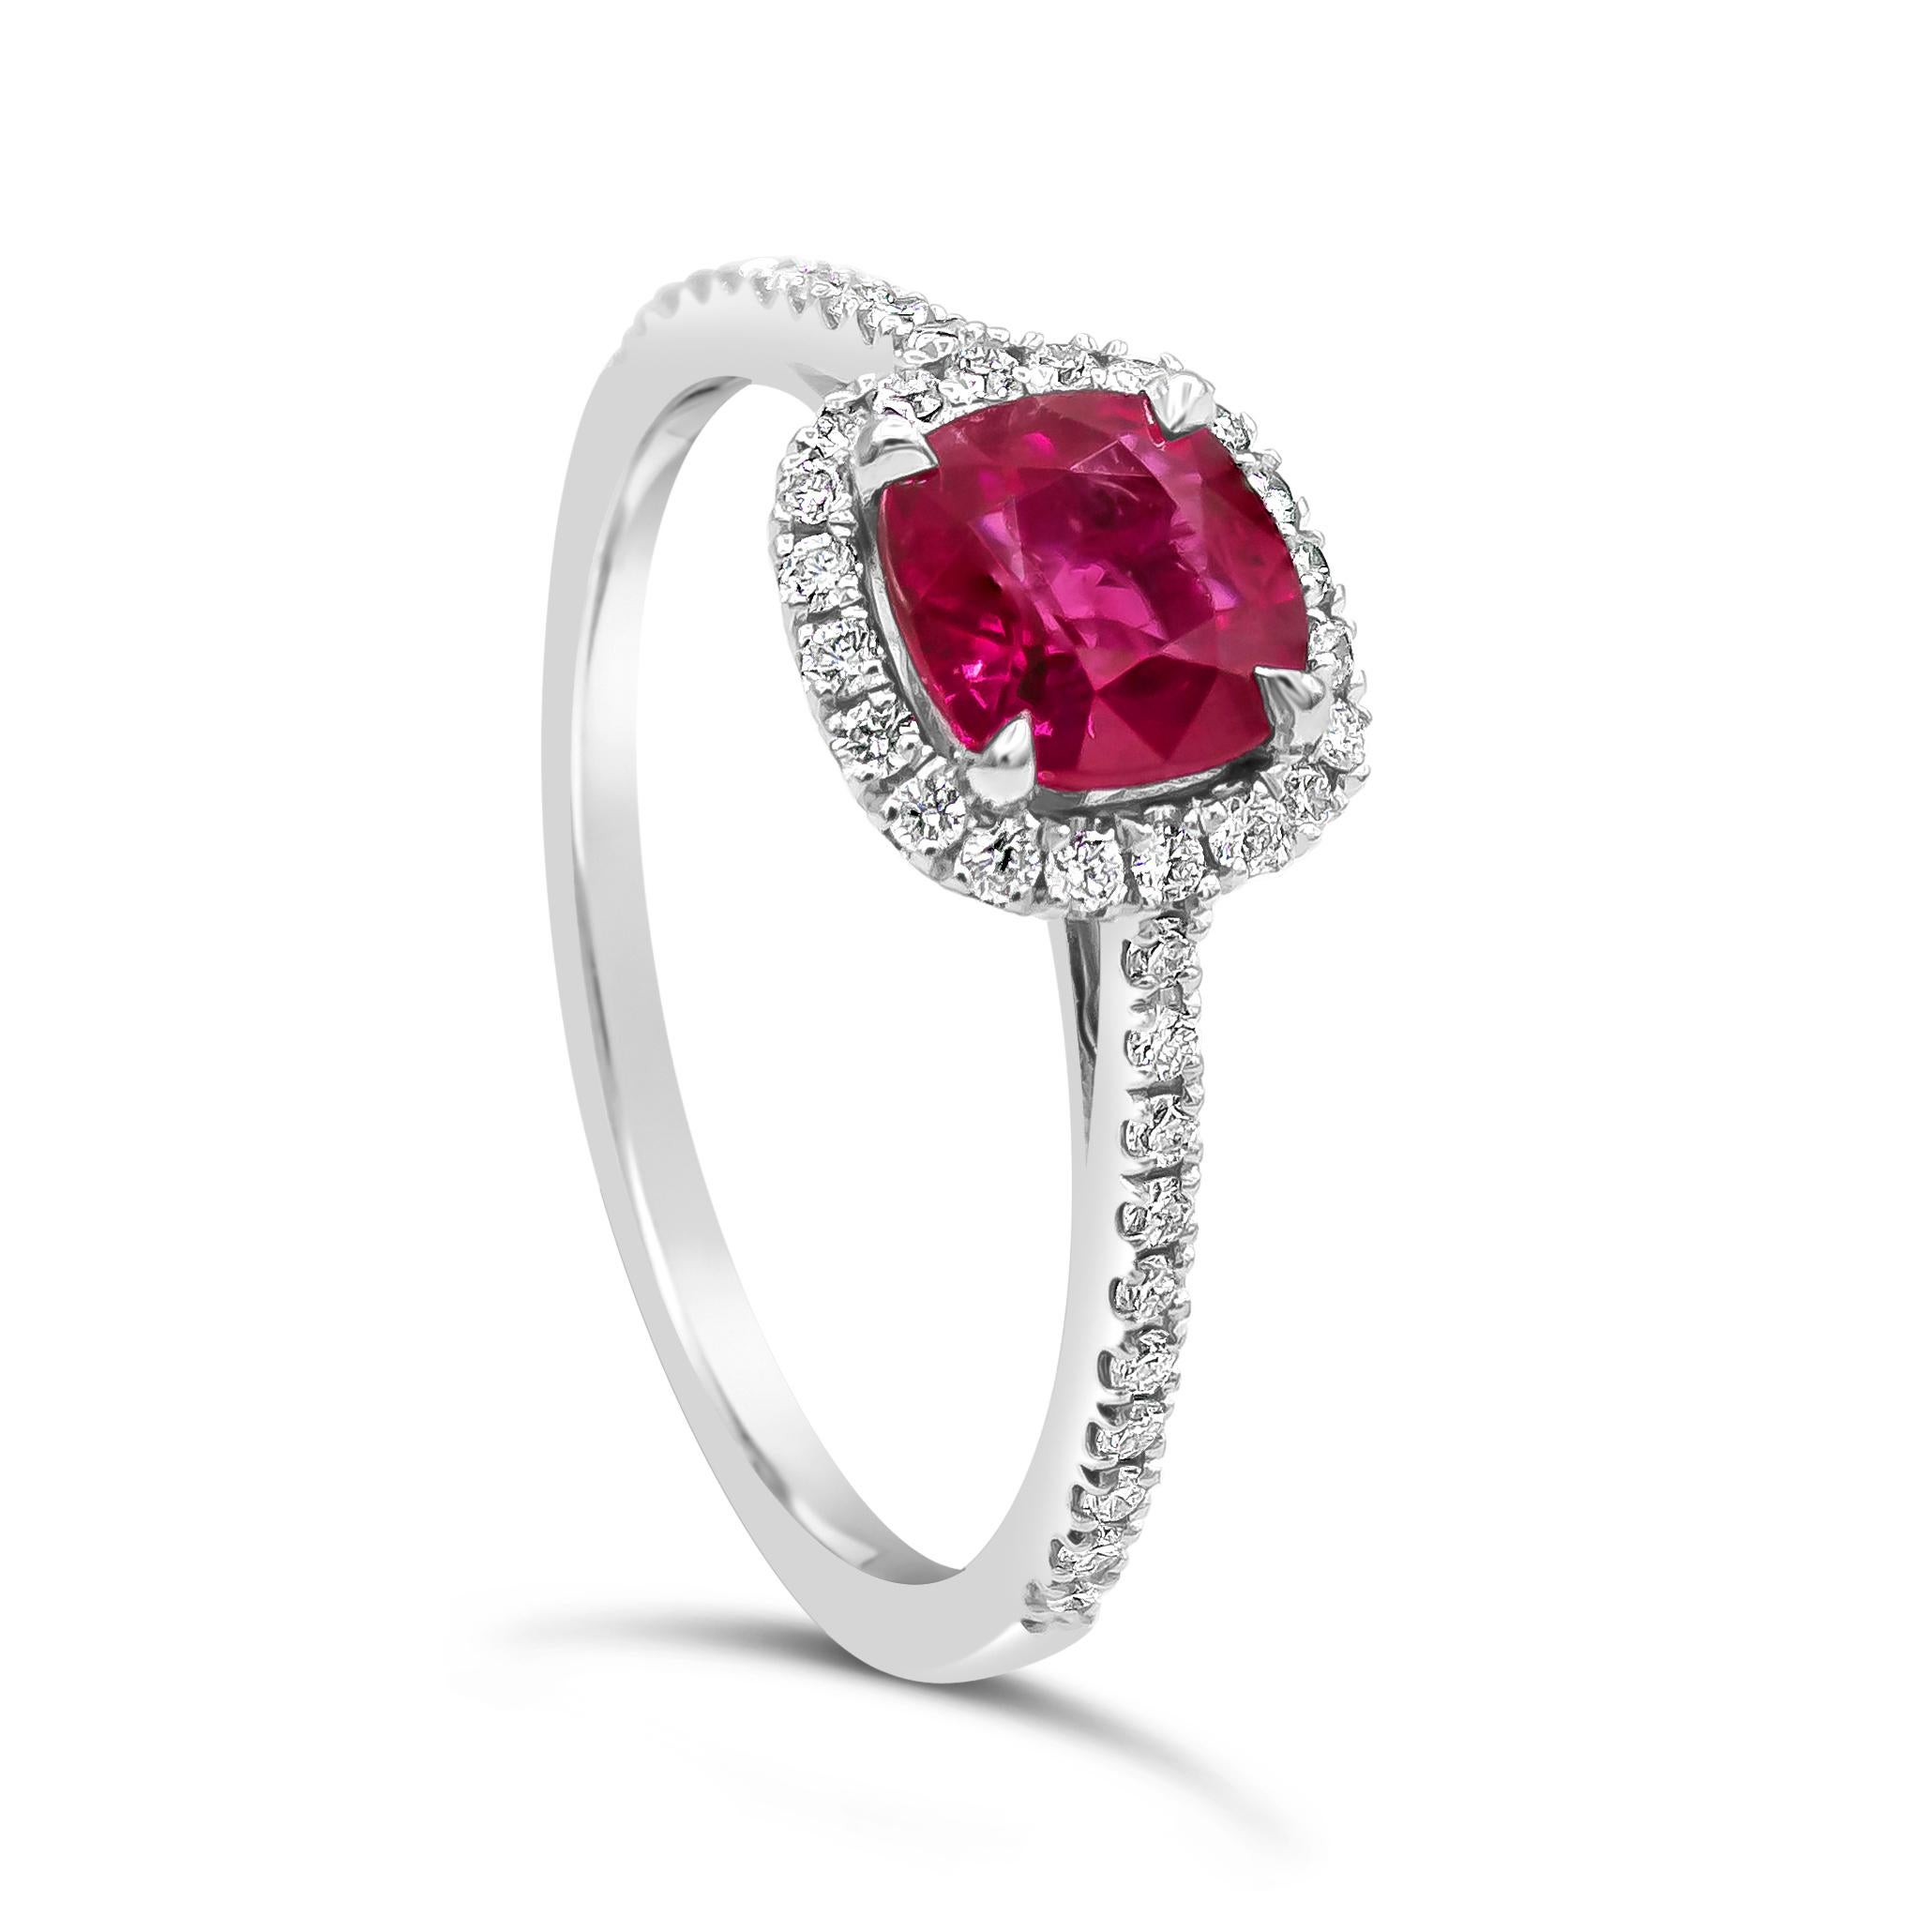 Showcases a cushion cut ruby weighing 1.11 carats, surrounded by a single row of round brilliant diamonds in a seamless halo design. Set in a thin 18 karat white gold band accented with diamonds. Diamonds weigh 0.24 carats total.

Style available in